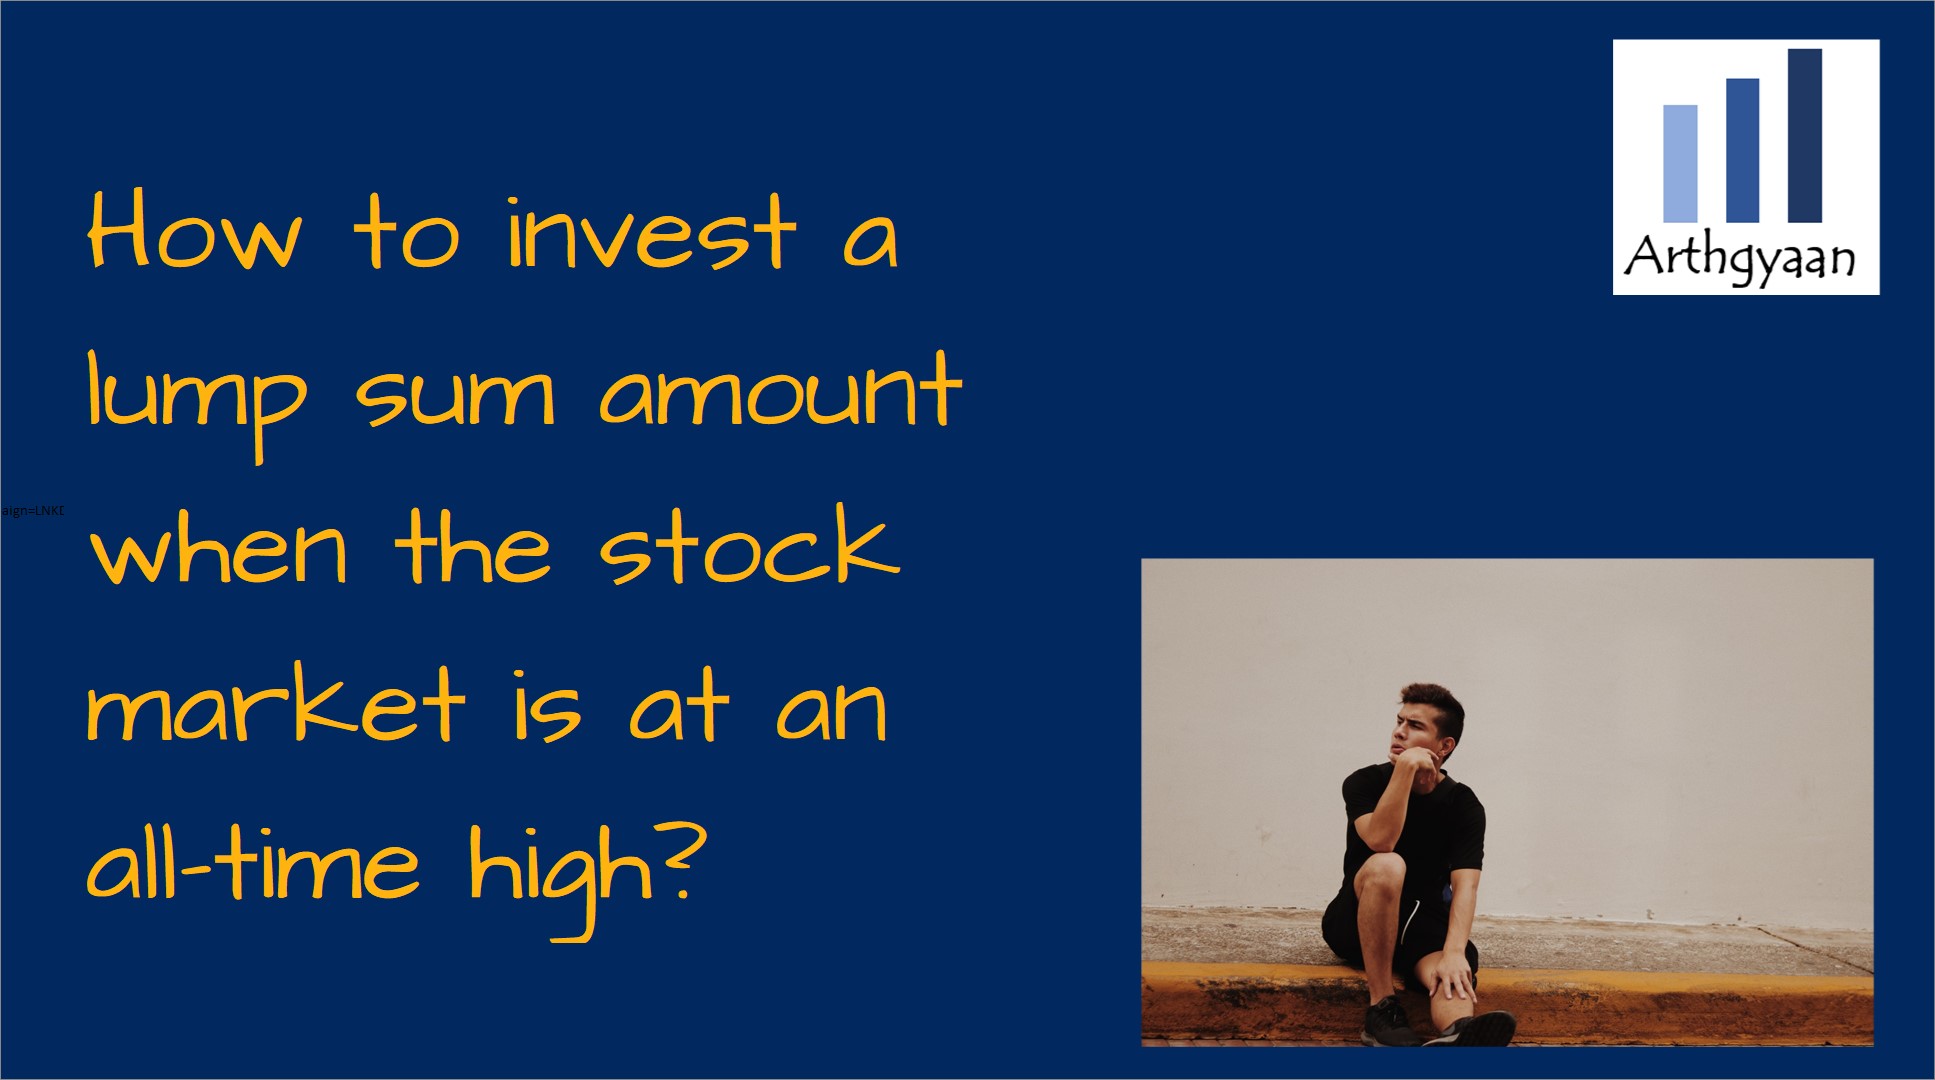 How to invest a lump sum amount when the stock market is at an all-time high?